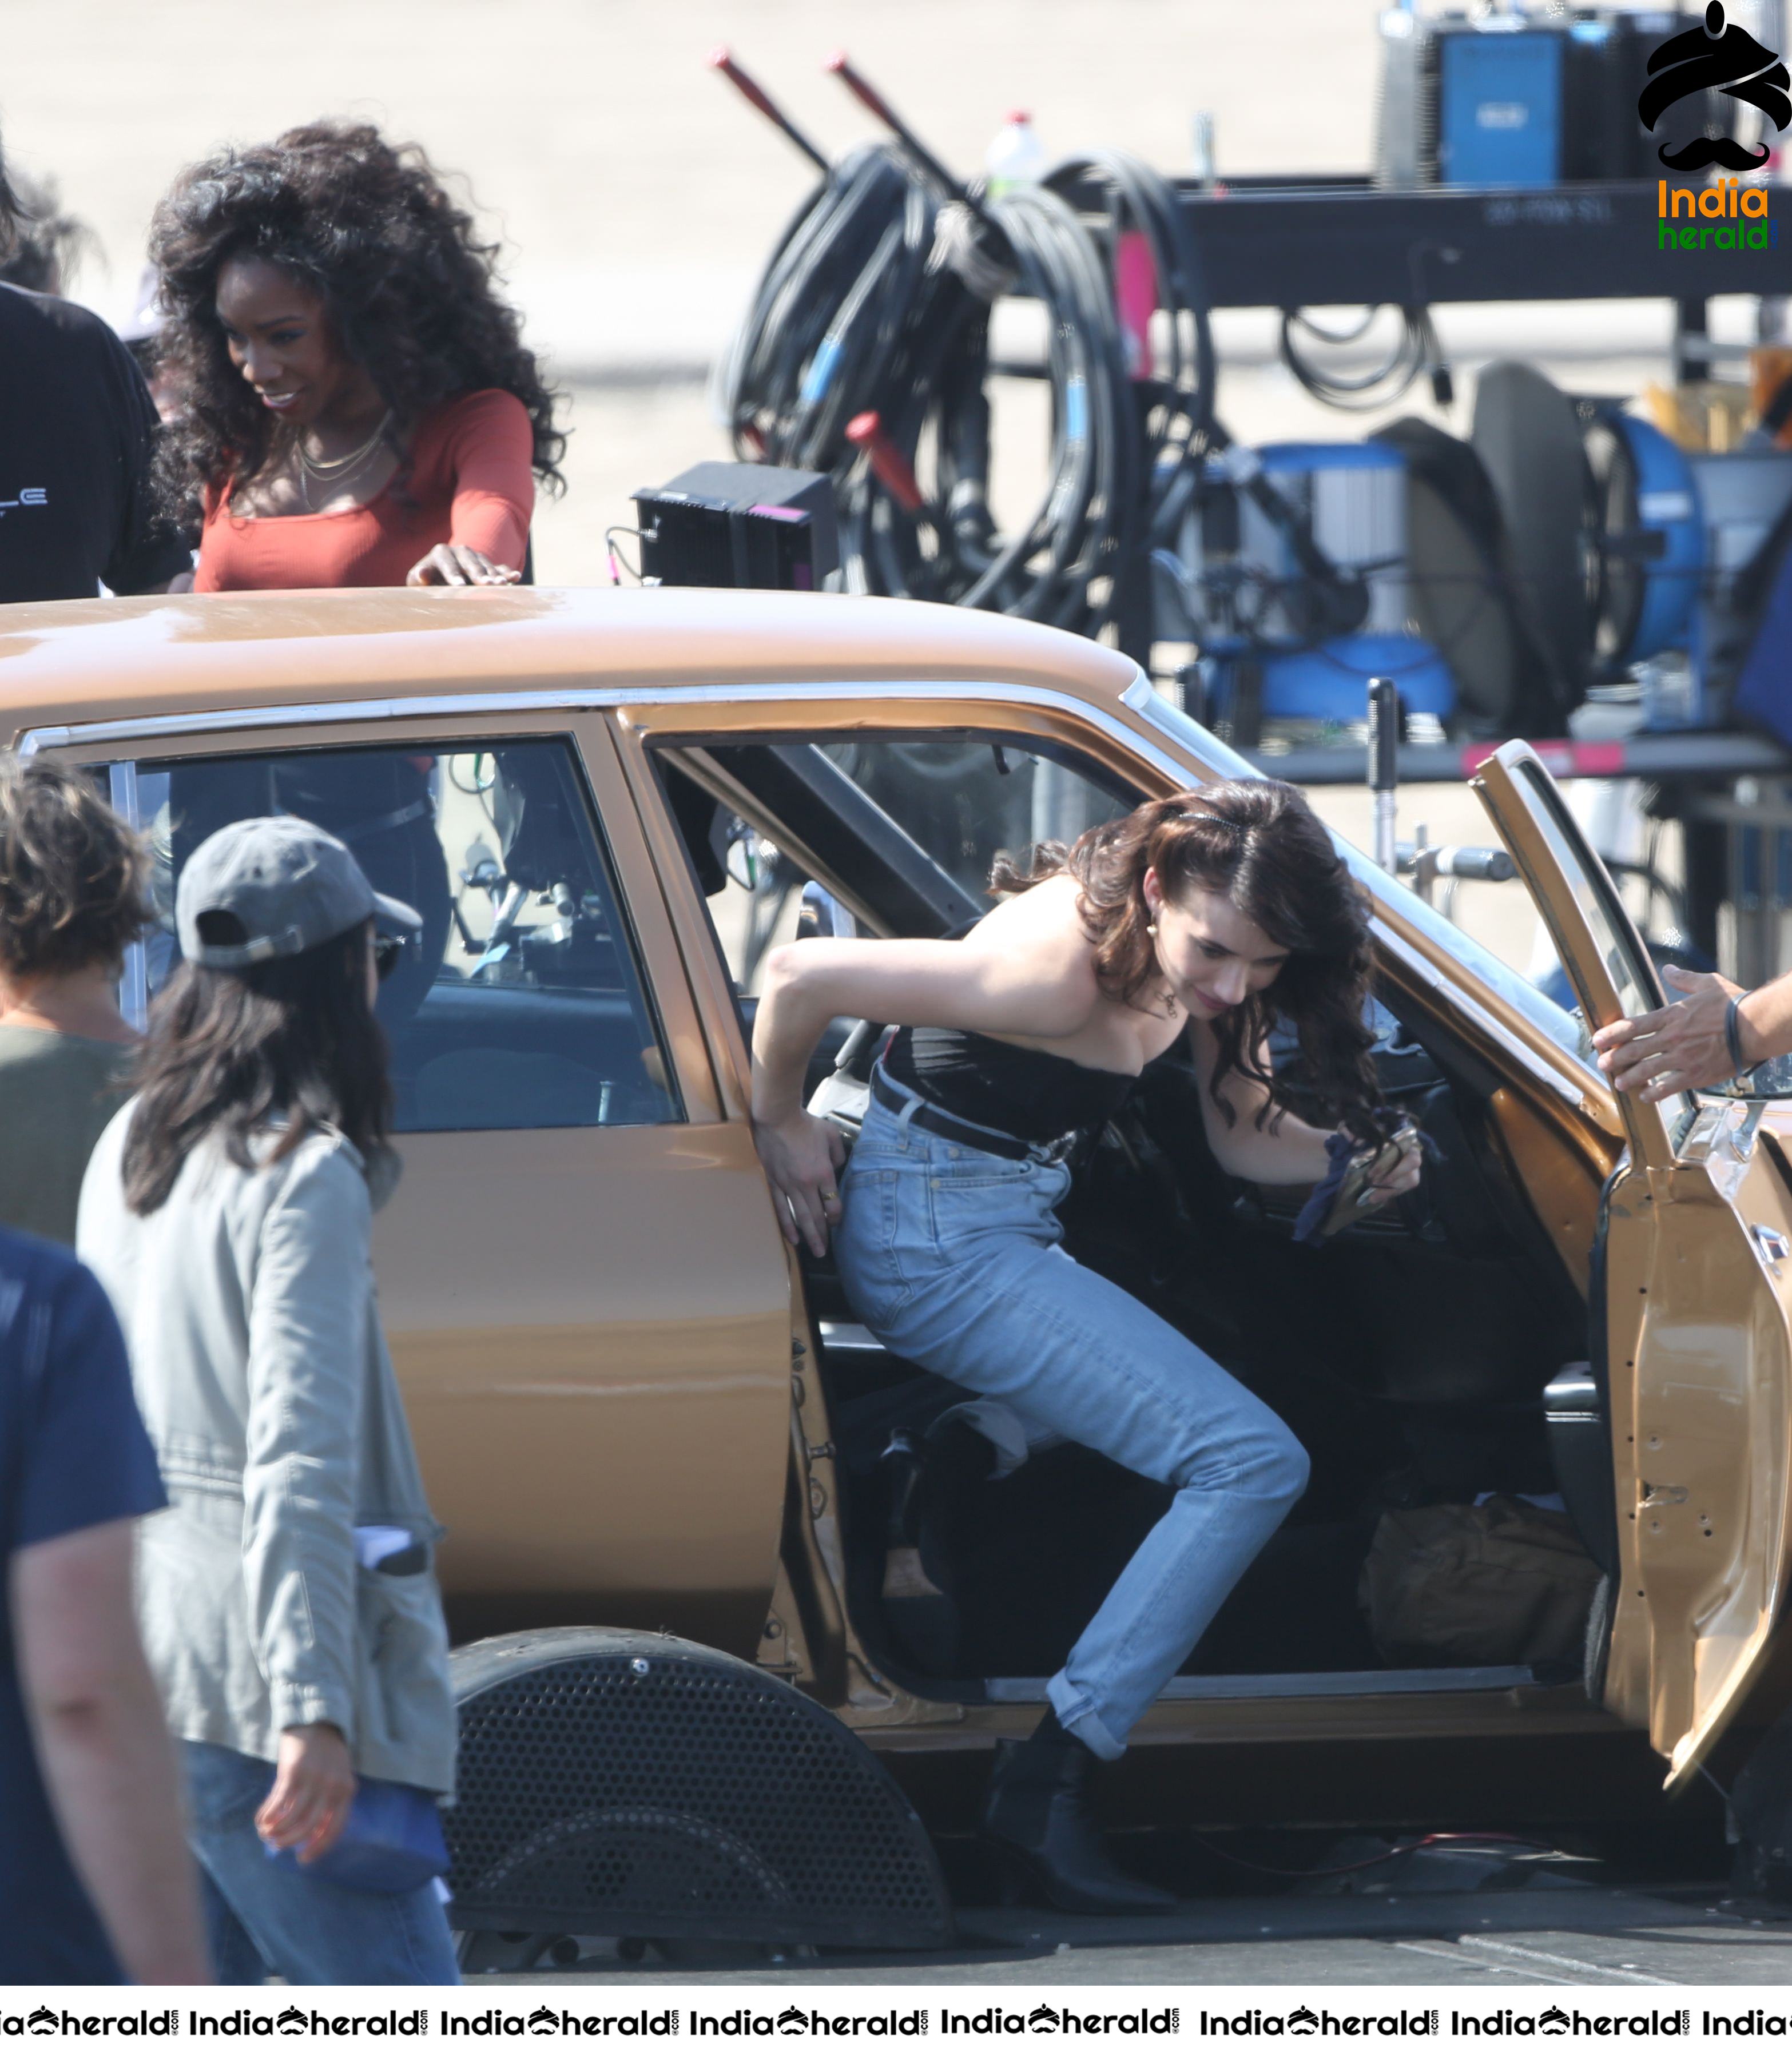 Emma Roberts On the Sets of American Horror Story 1984 in Los Angeles Set 1